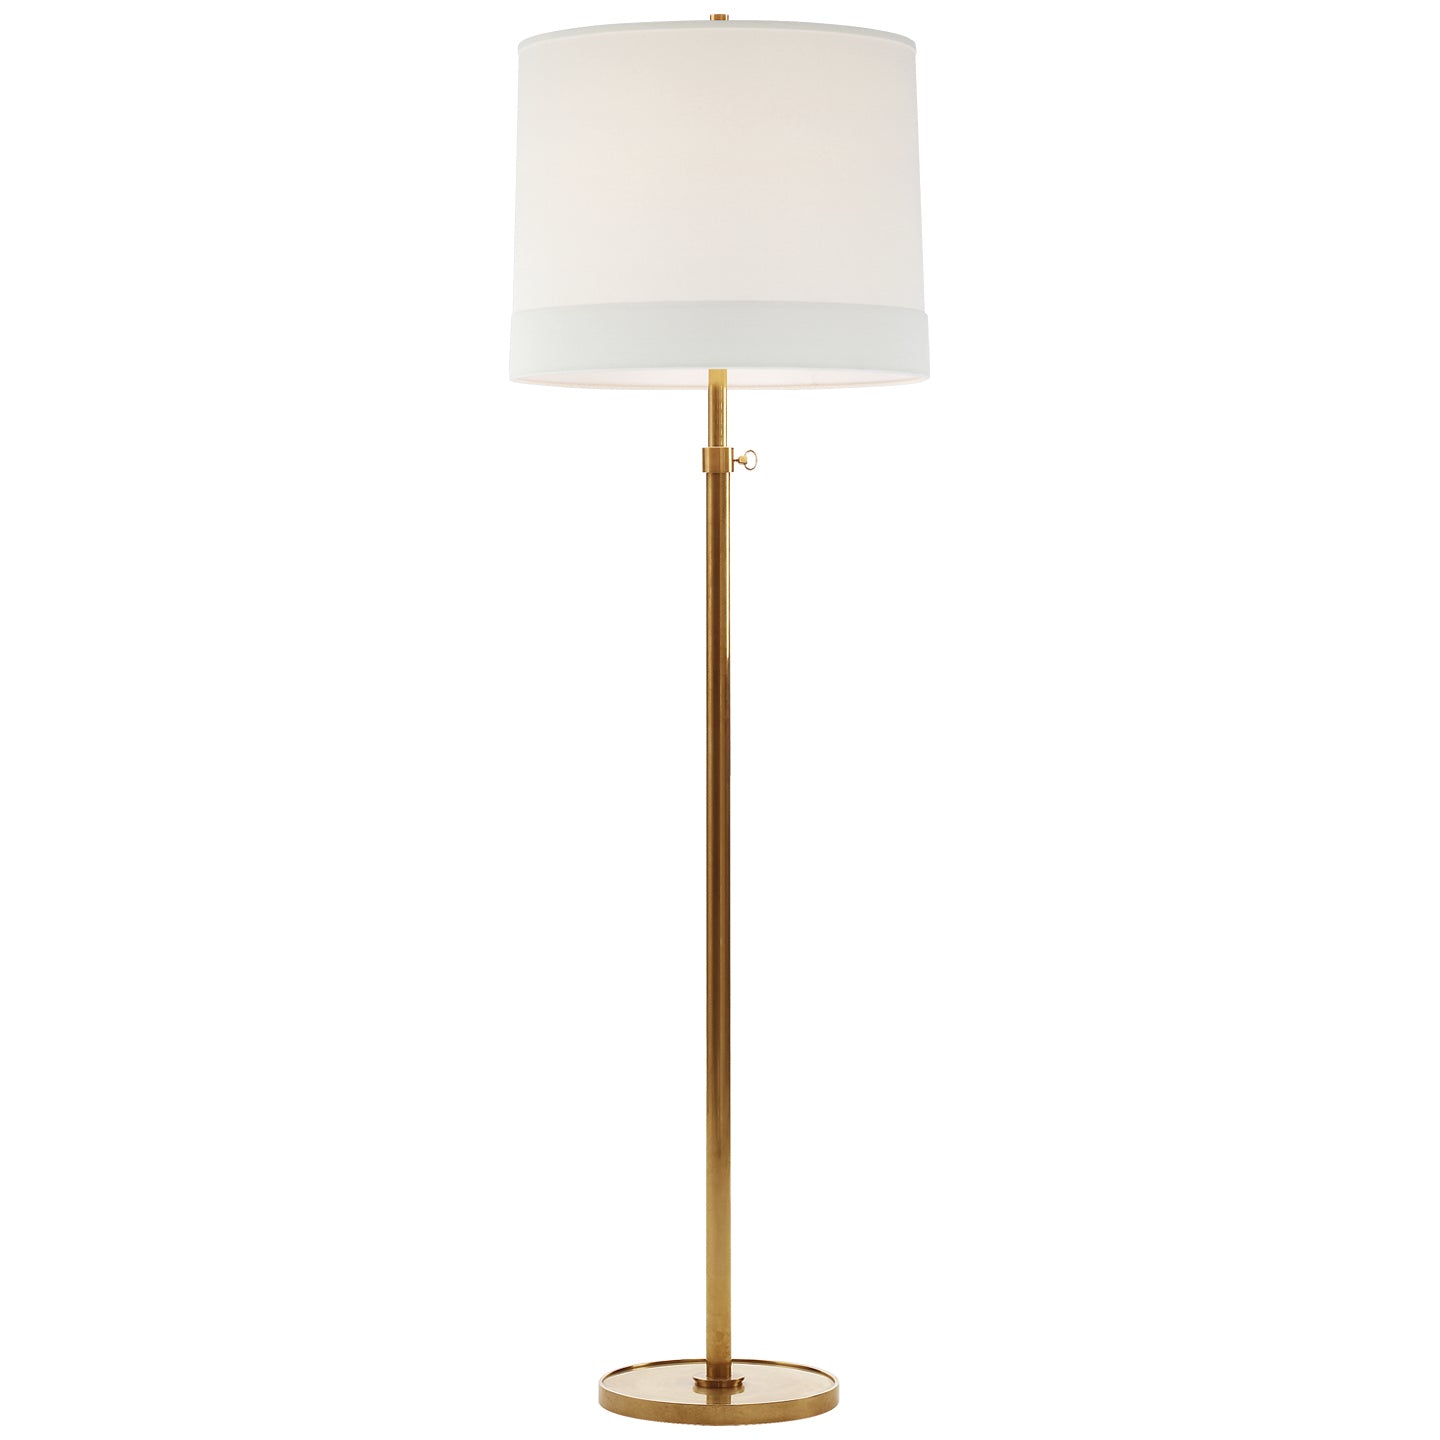 Load image into Gallery viewer, Visual Comfort Signature - BBL 1023SB-L - One Light Floor Lamp - Simple Scallop - Soft Brass
